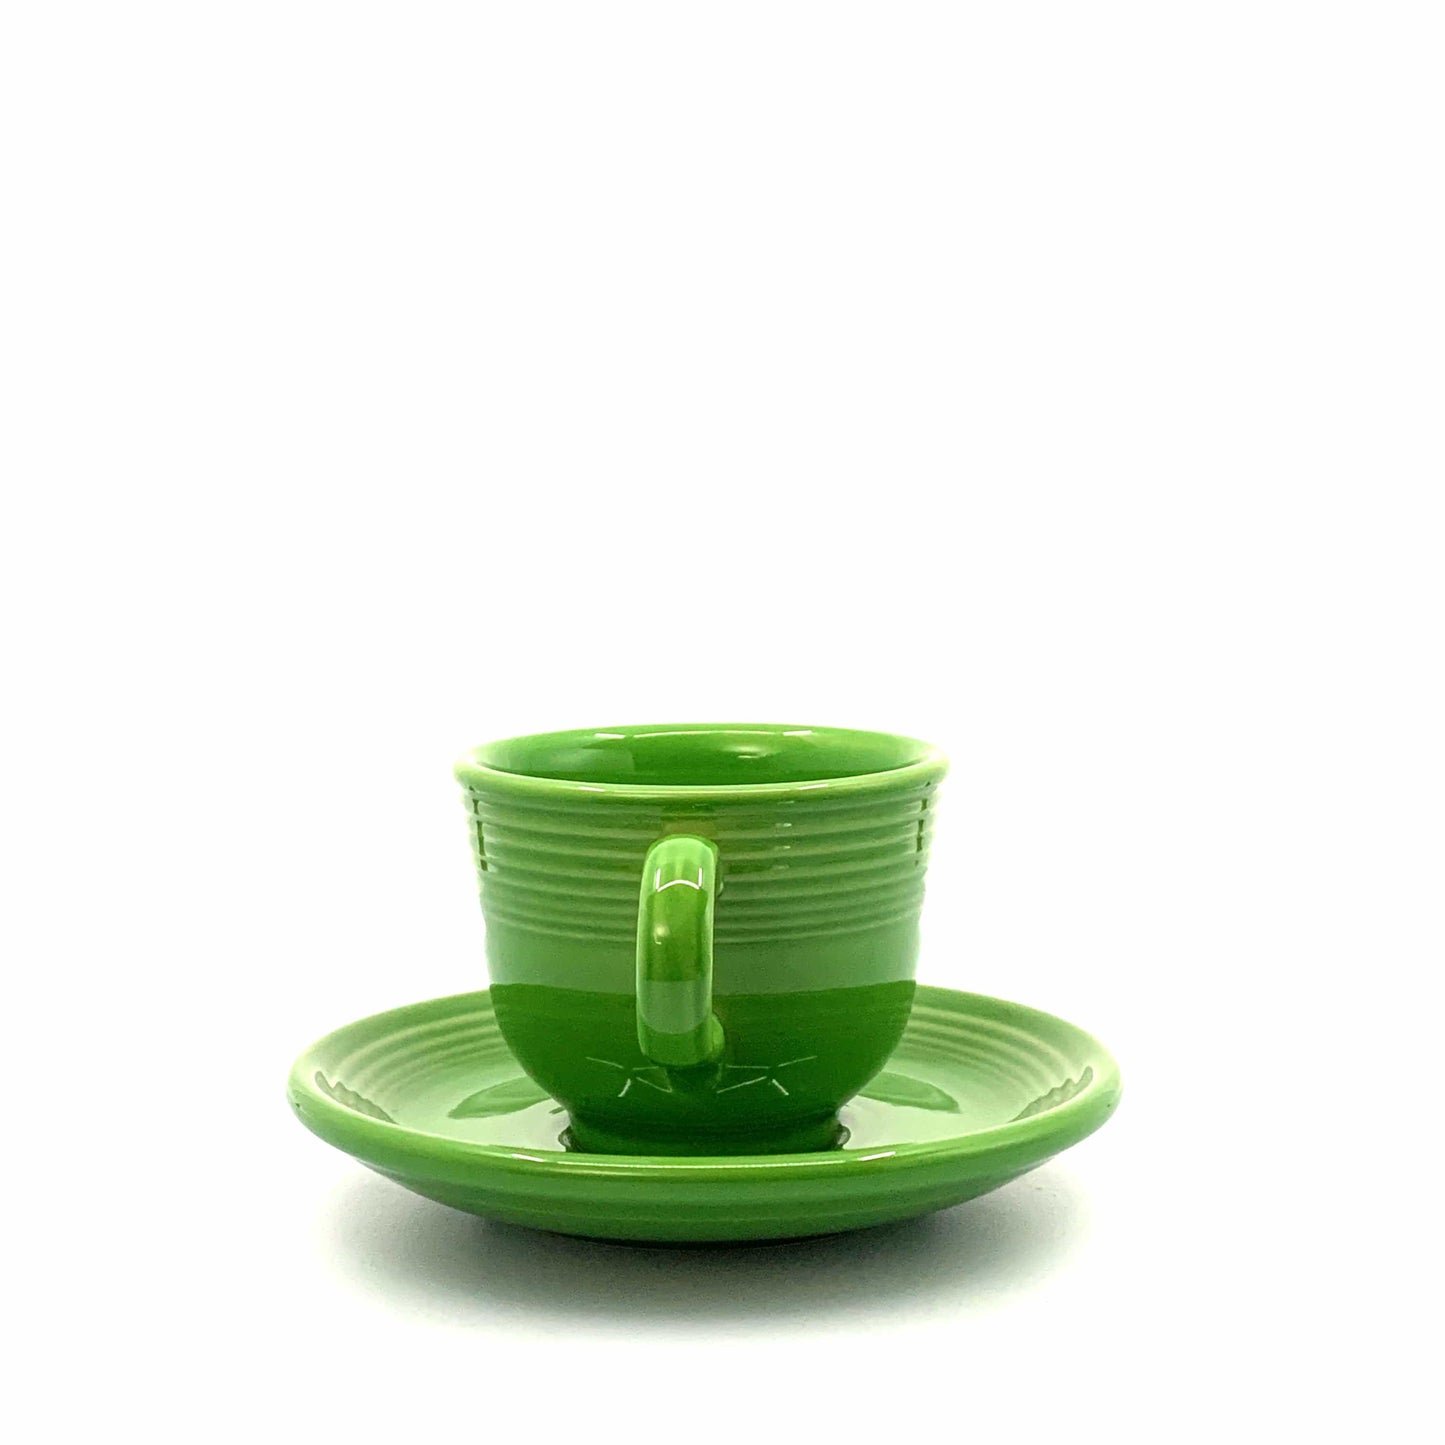 Fiesta Green Replacement Tea Coffee Cup and Saucer Set Homer Laughlin Co USA.